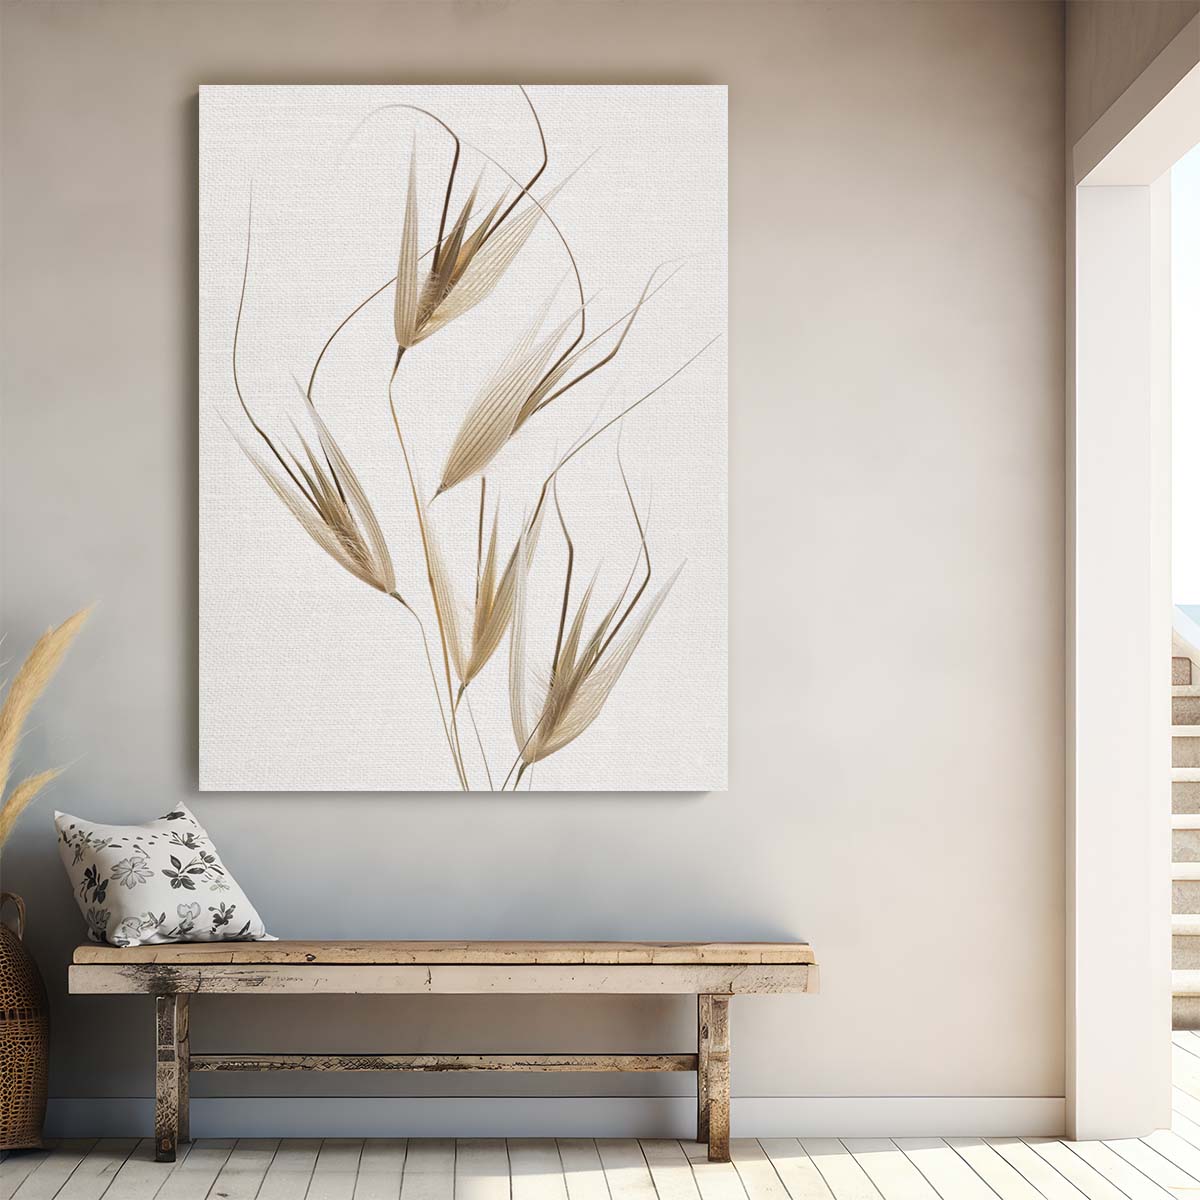 Serene Zen Wheat Photography Minimalistic, Peaceful Still Life Art by Luxuriance Designs, made in USA